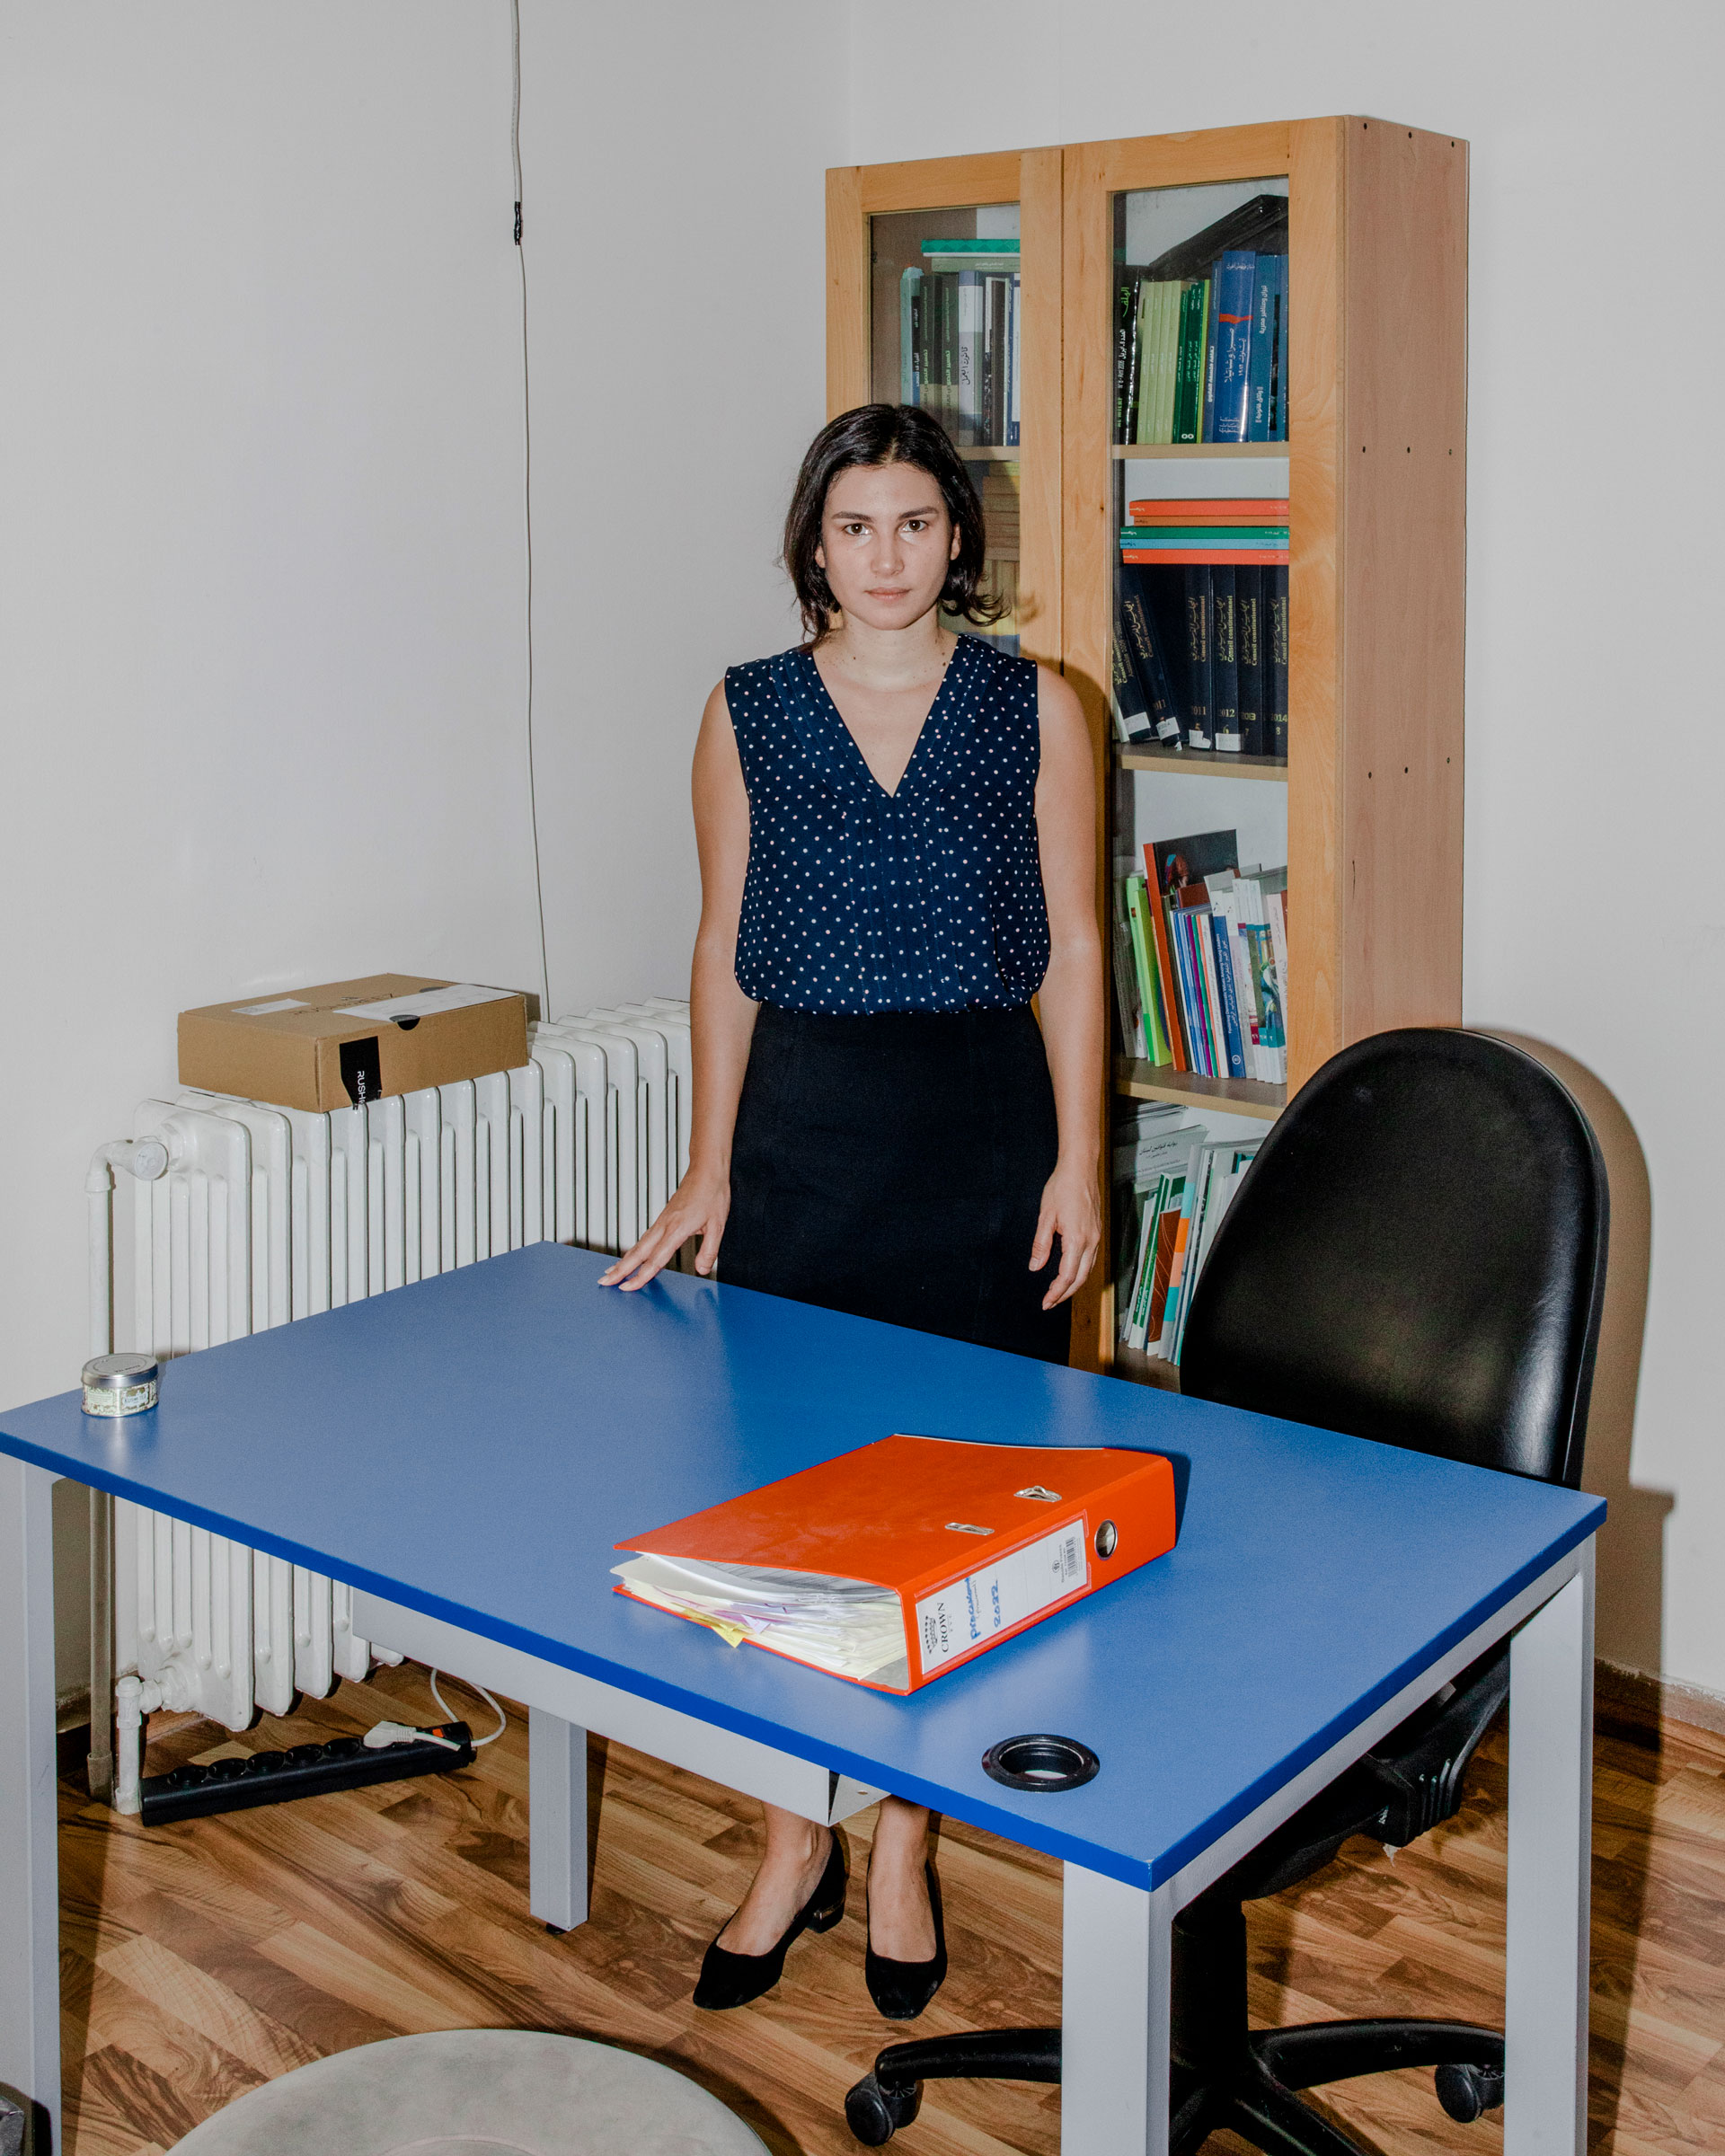 Ghida Frangieh in the Legal Agenda offices in Beirut’s Badaro neighborhood on July 21. (Myriam Boulos—Magnum Photos for TIME)